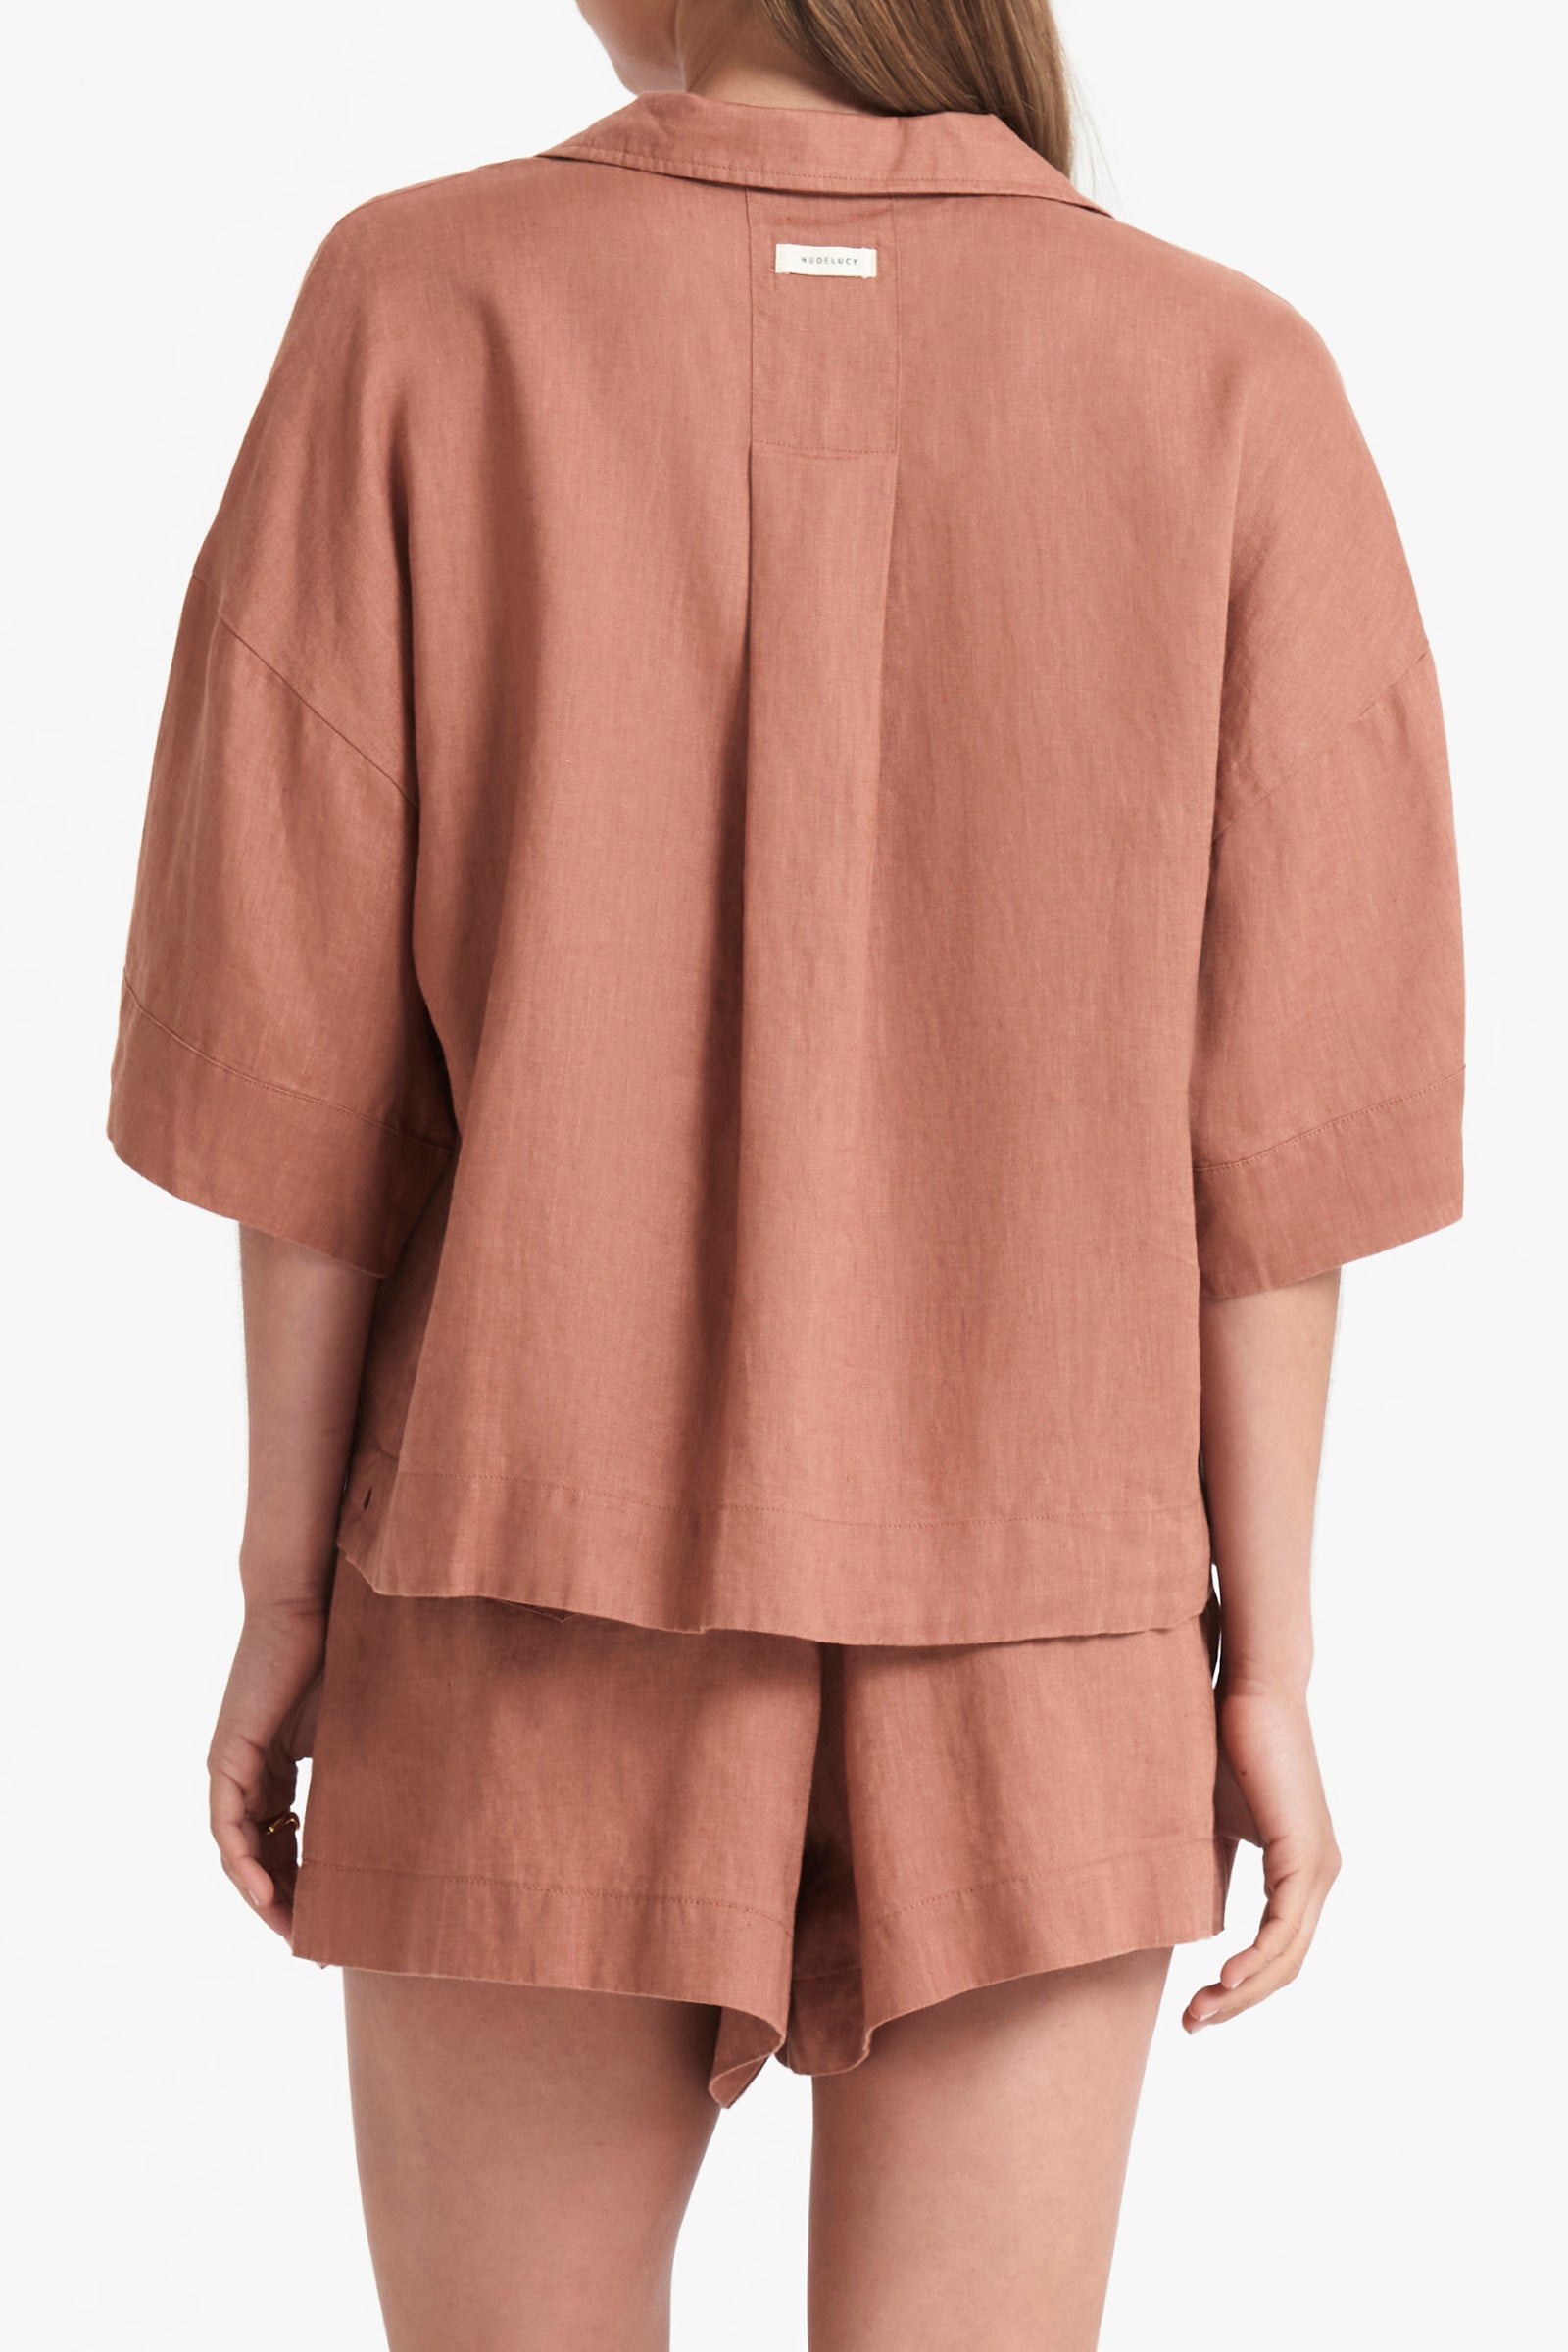 Nude Lucy Lounge Linen Shirt in Terracotta